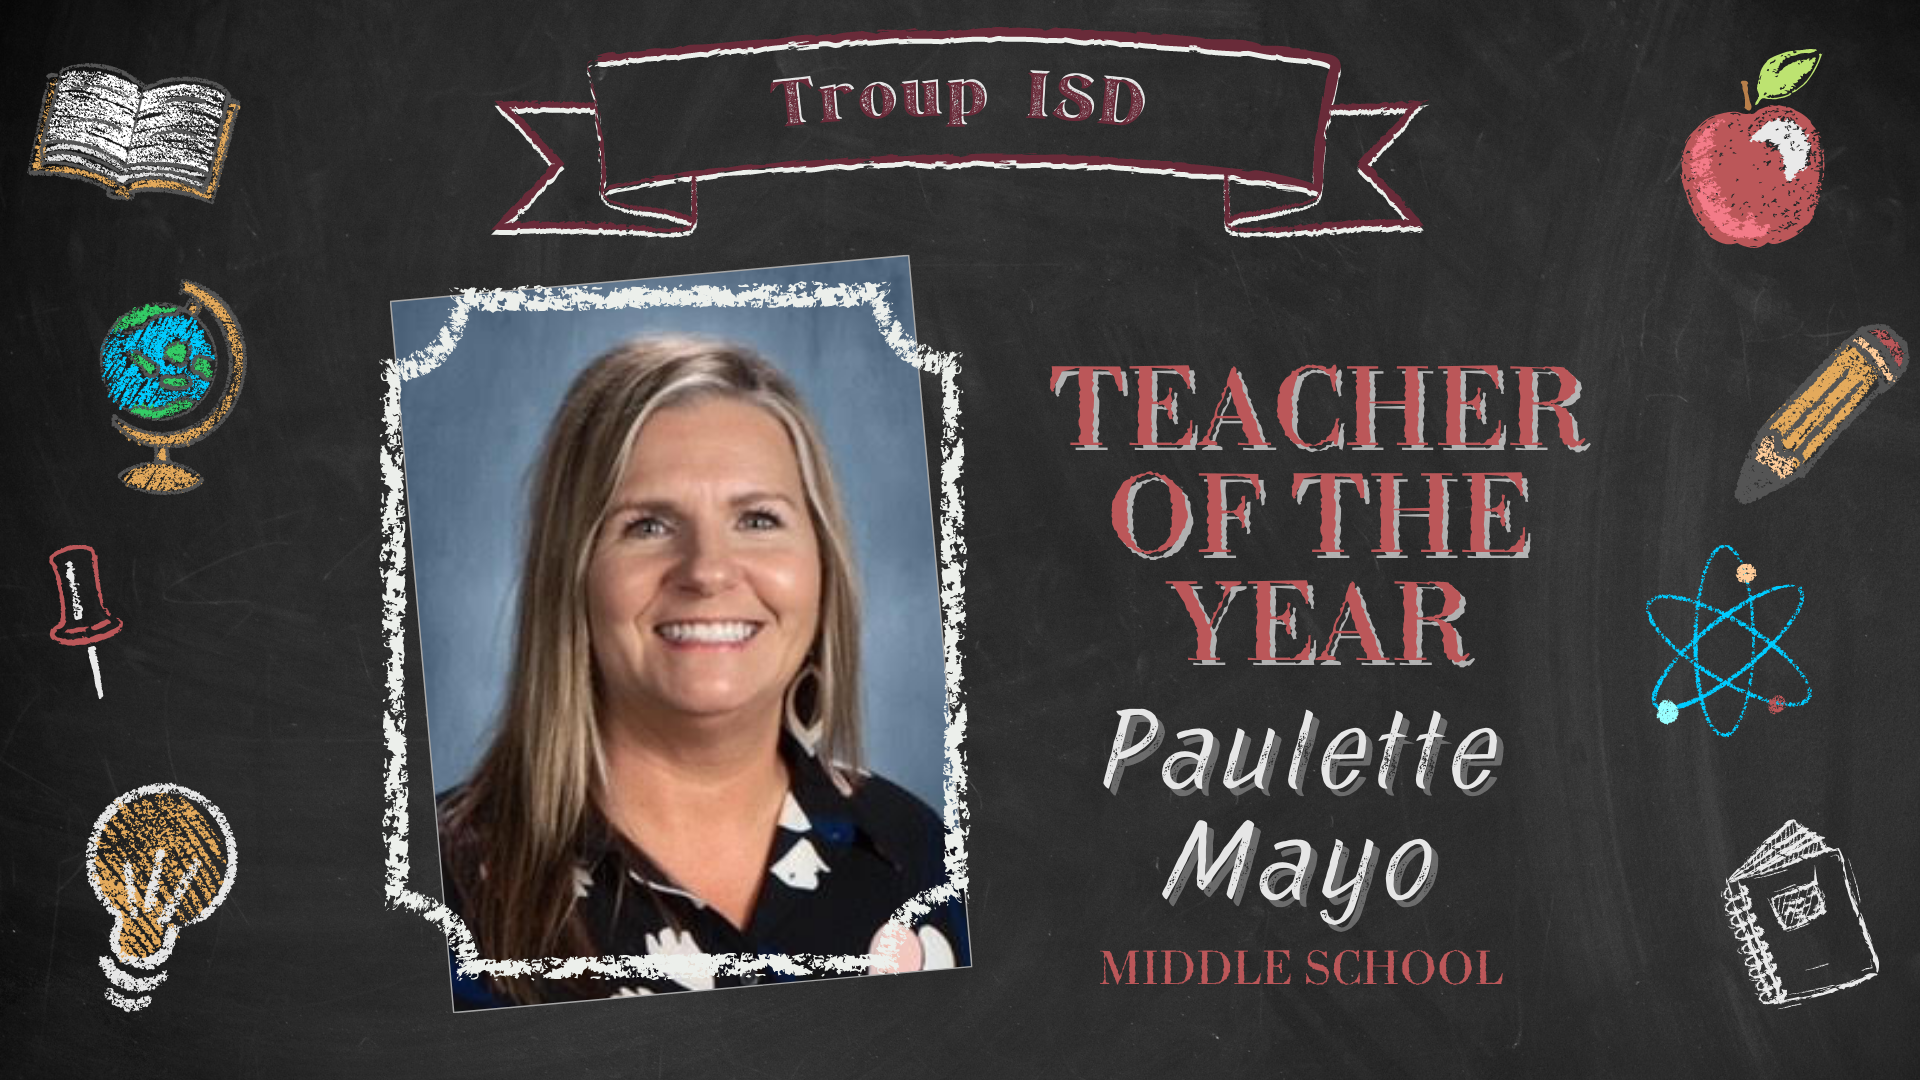 PM teacher of the year